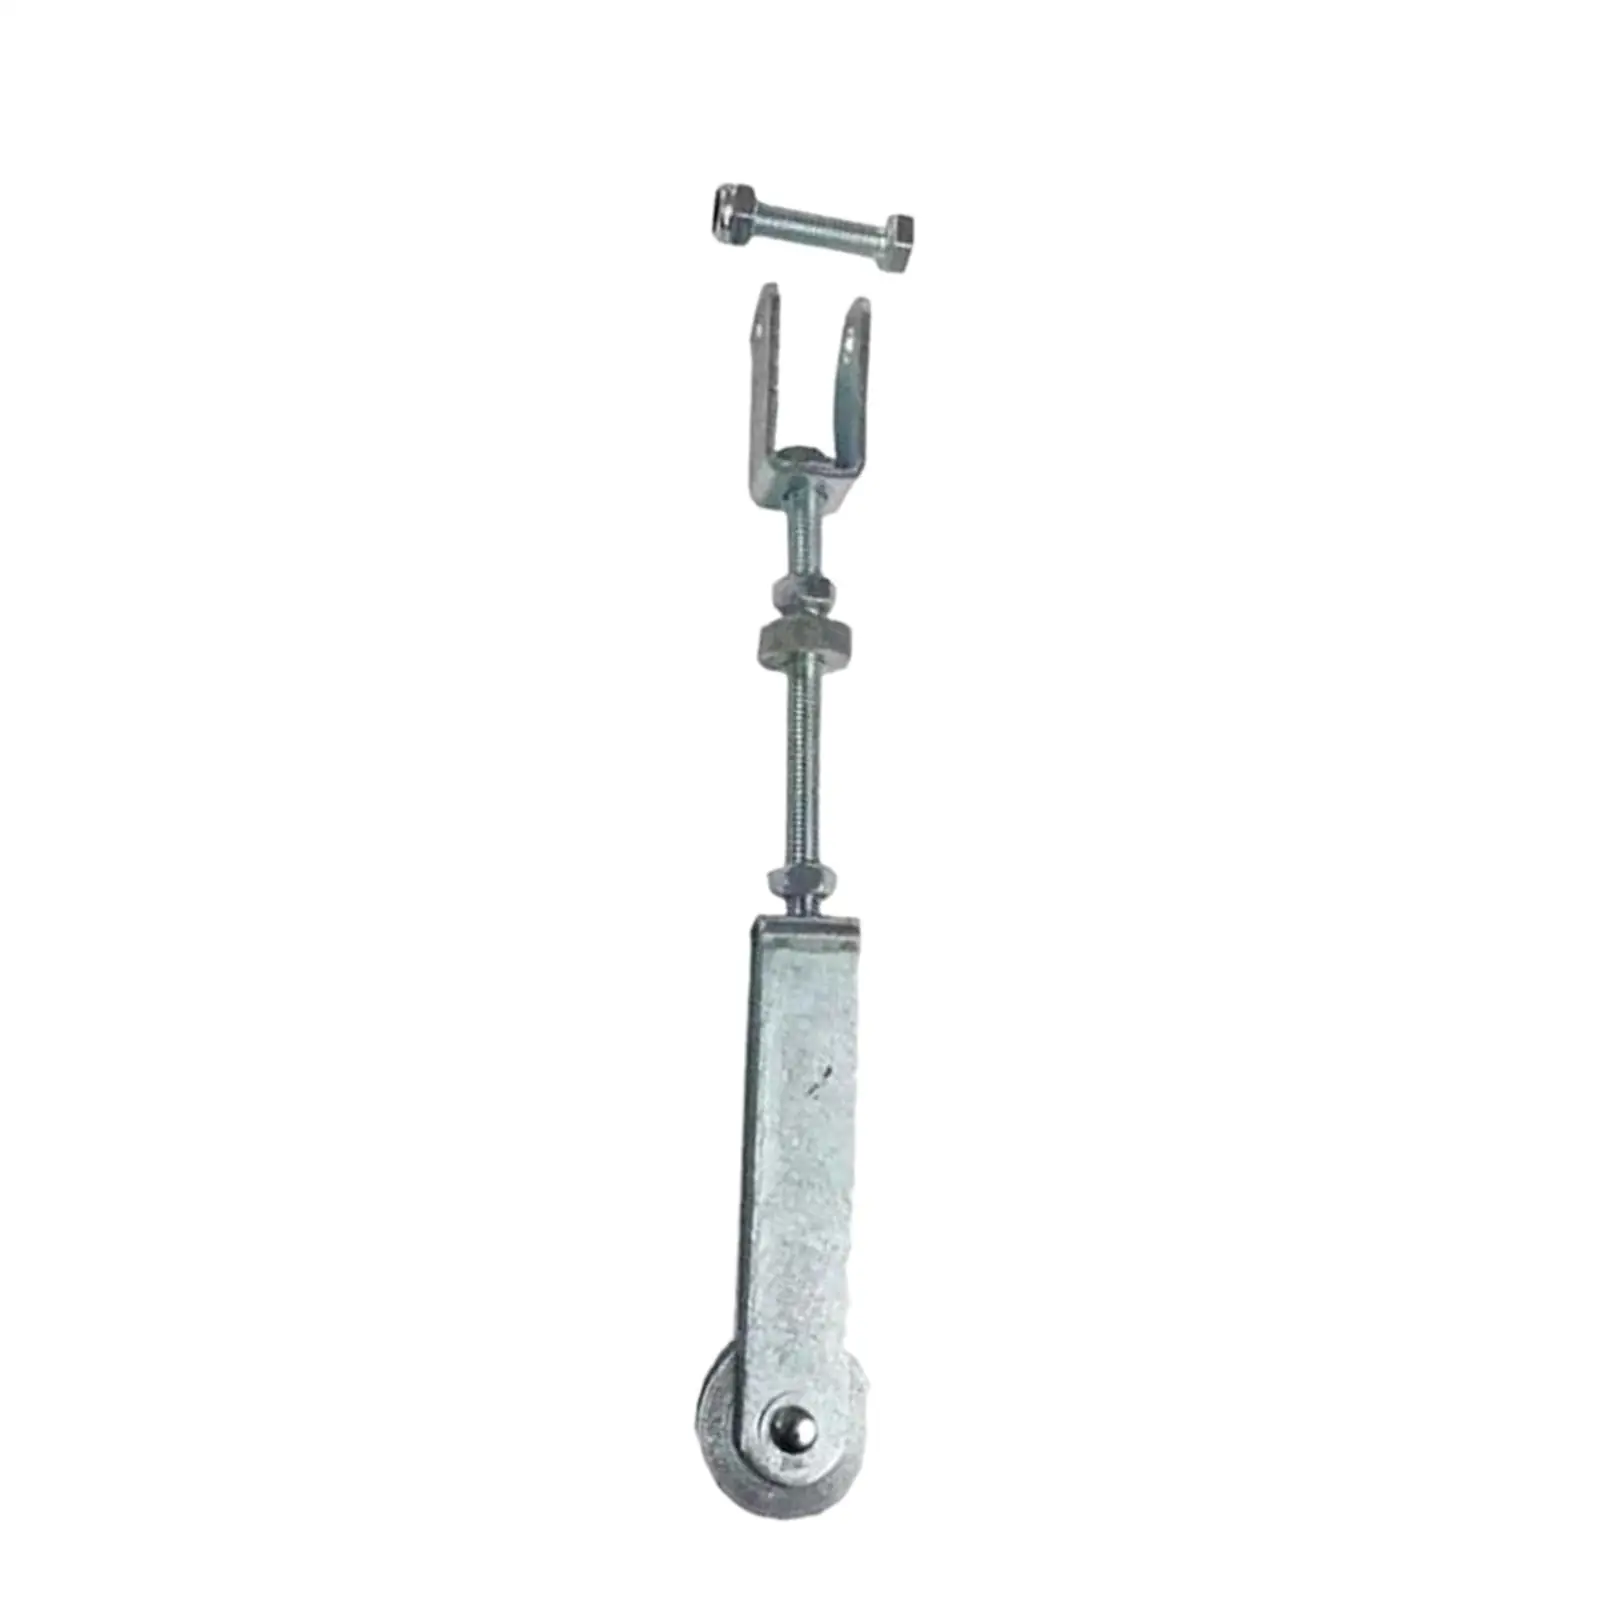 Trailer Hand Brake Cable Adjuster 240mm Long for Car Trailers Boat